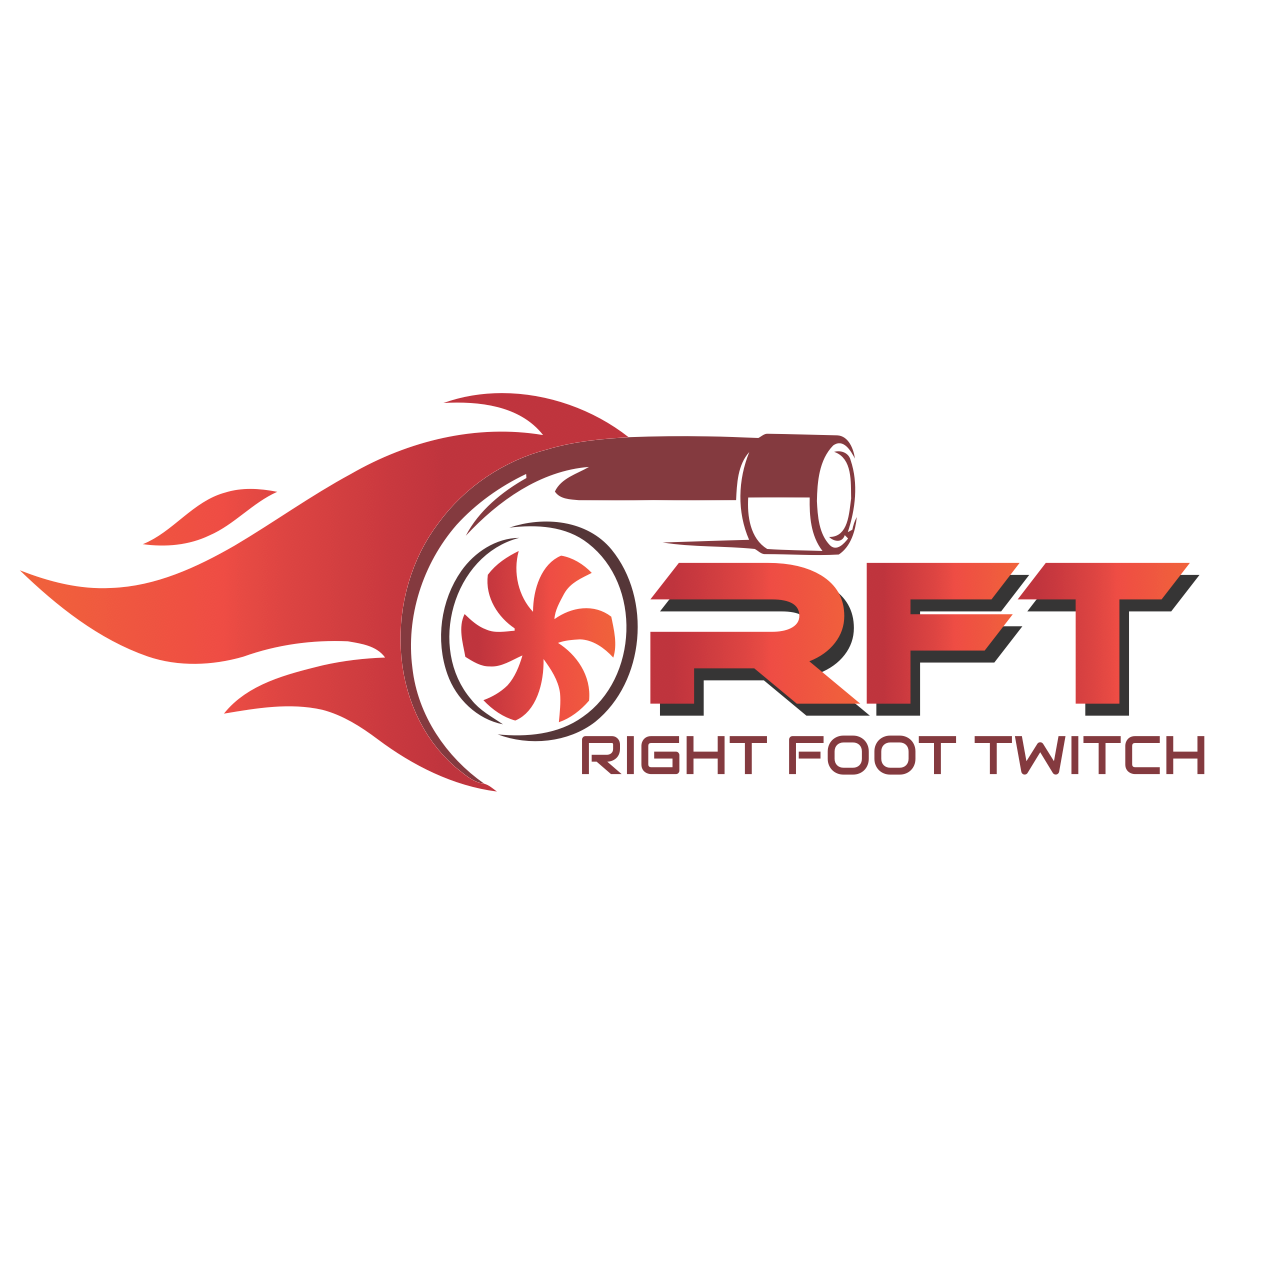 Right Foot Twitch